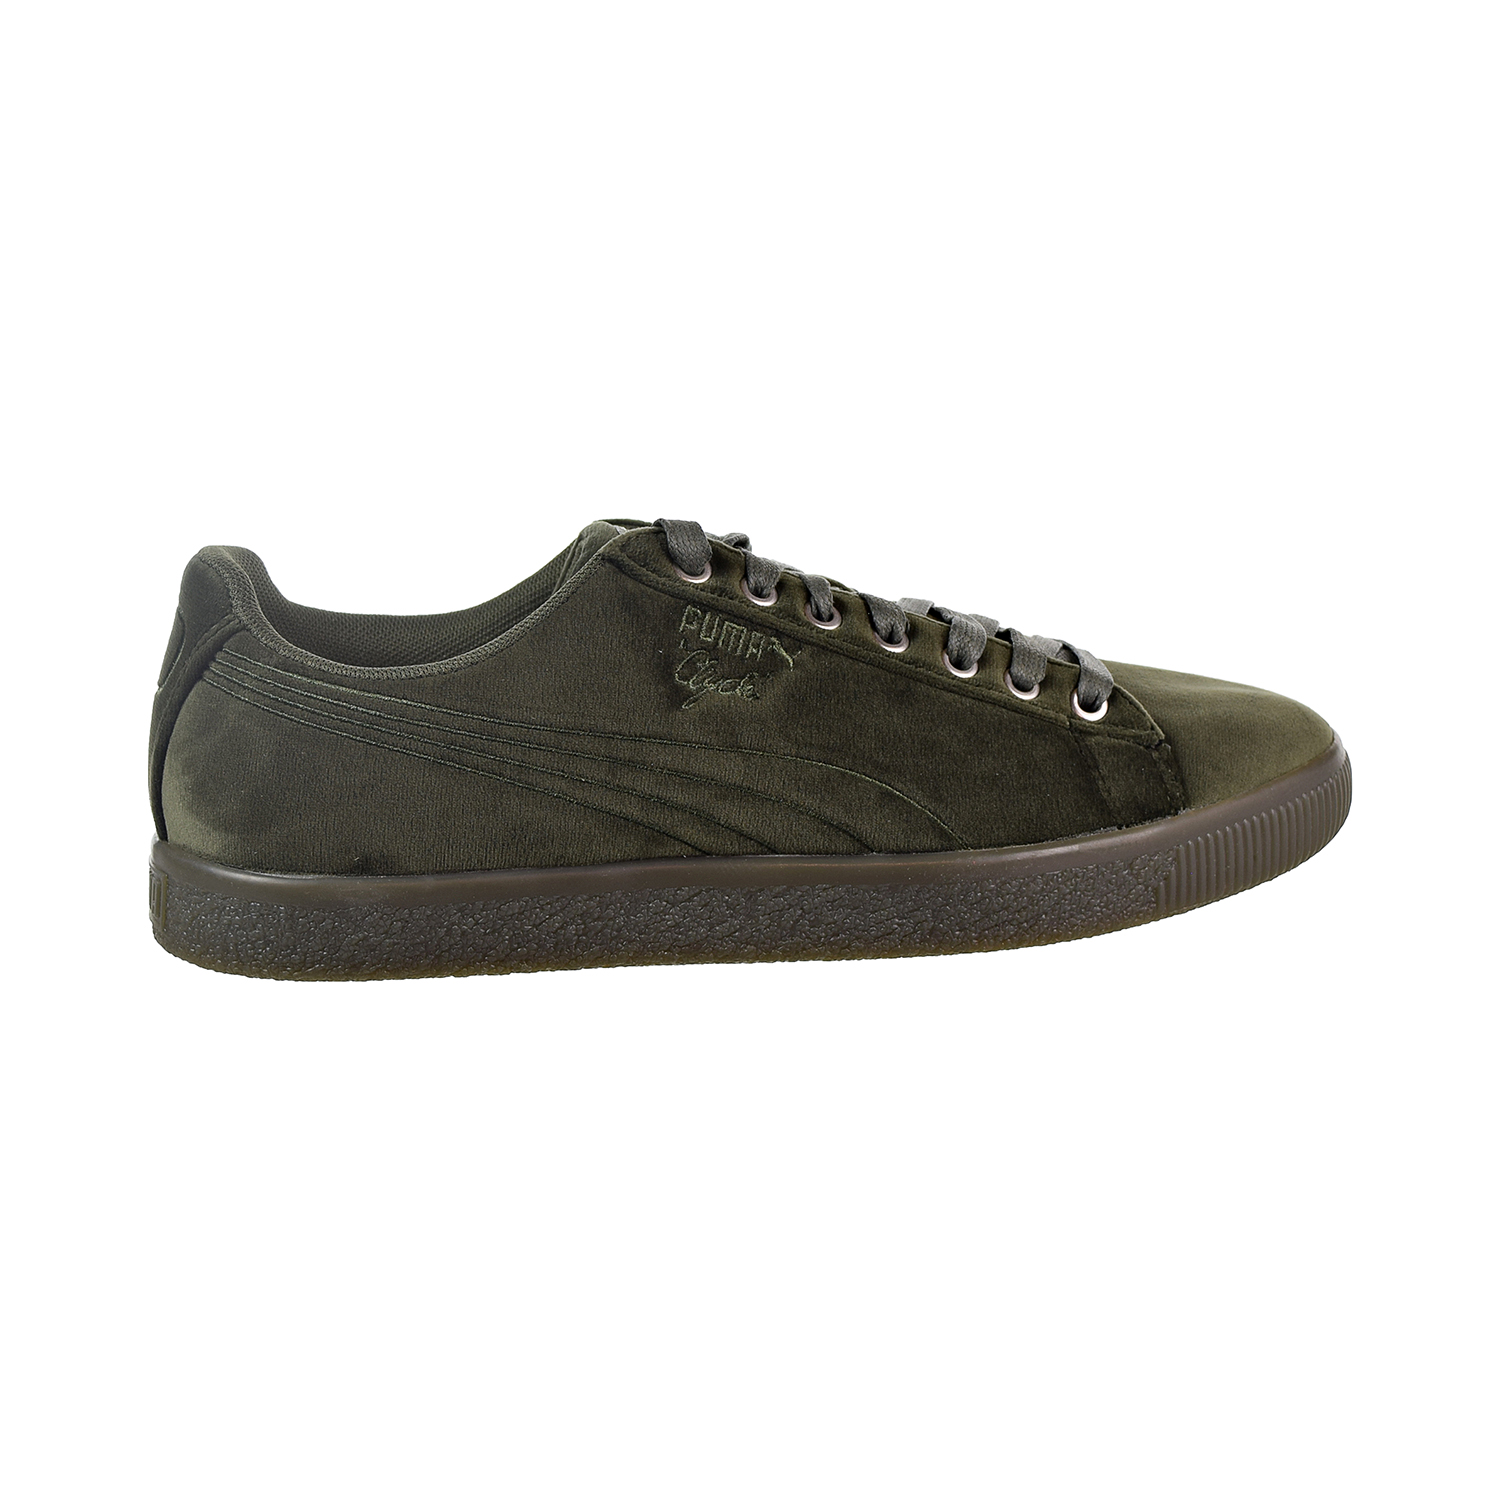 Puma clyde Velour Ice Men's Shoes Olive Green 366549-03 - image 1 of 6